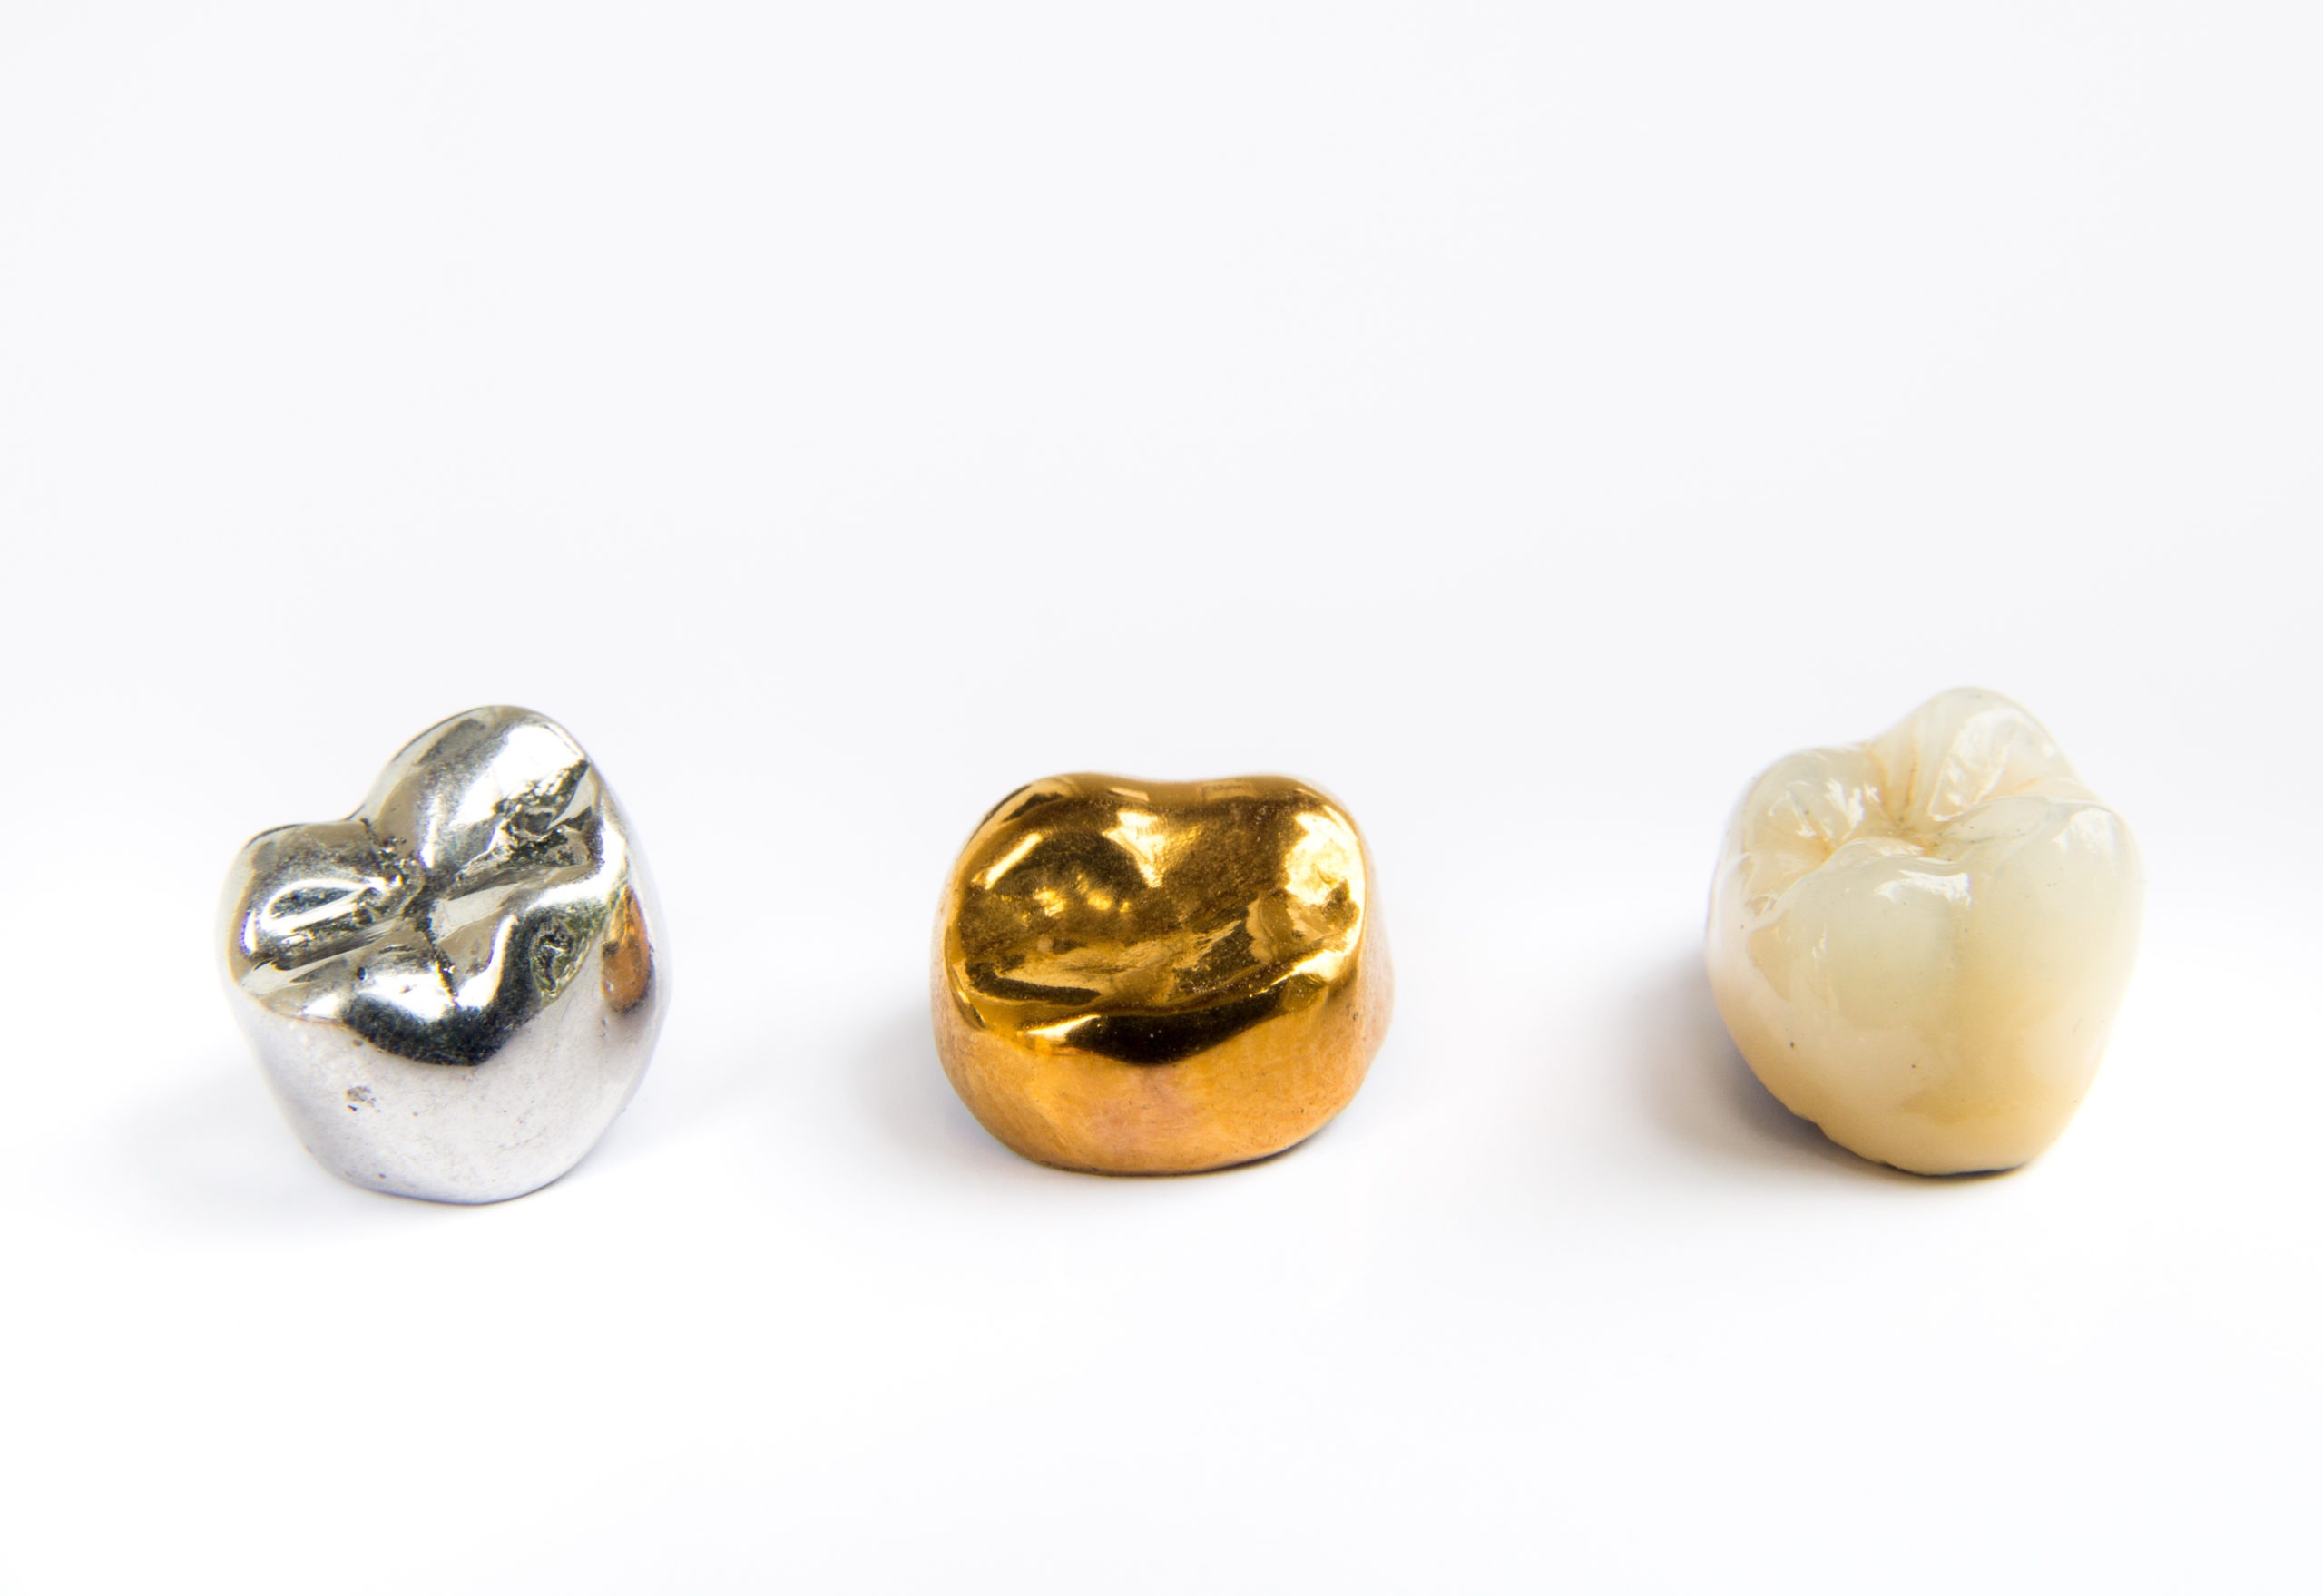 Are permanent gold teeth better than temporary?